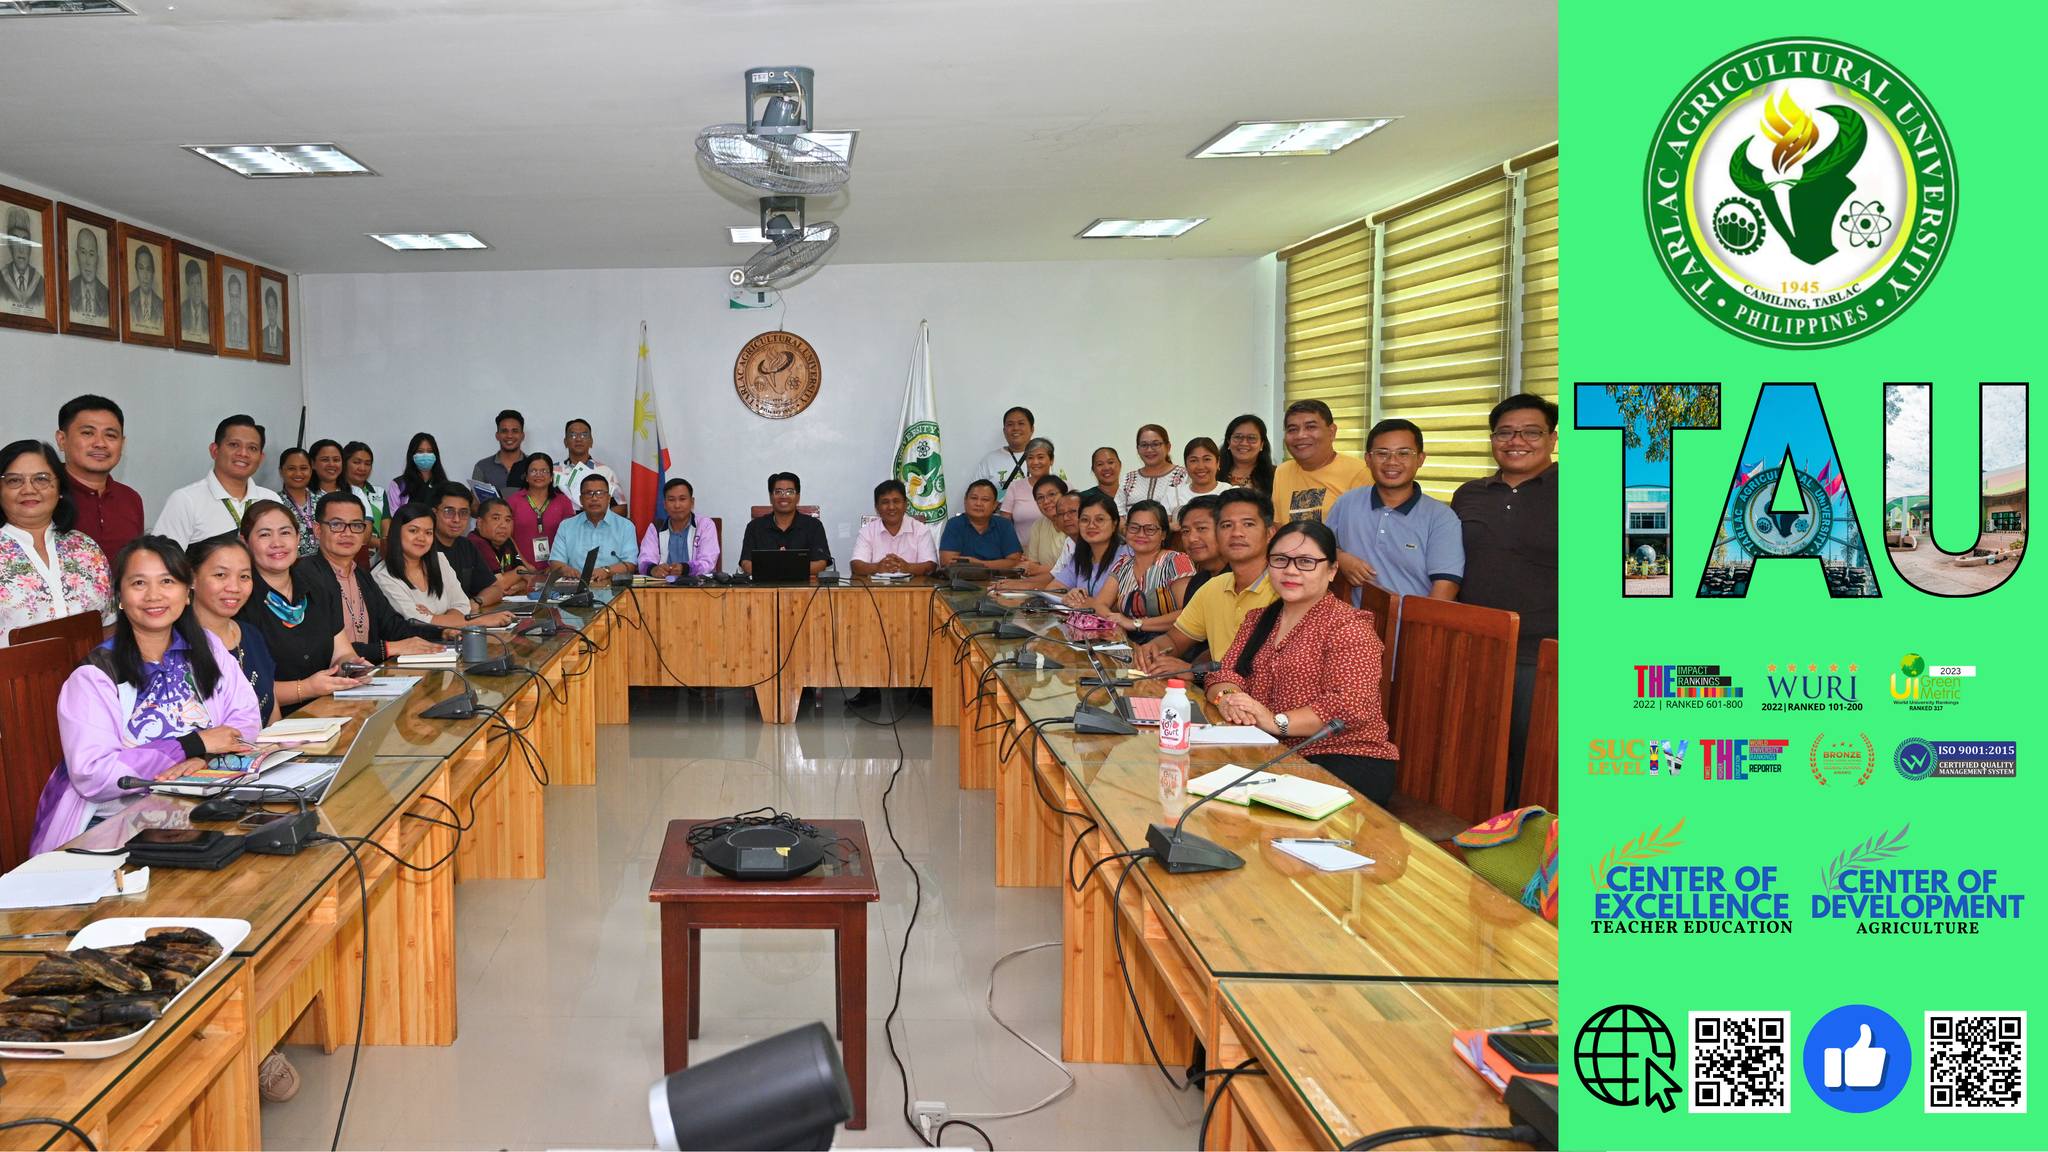 Newly designated members of the Tarlac Agricultural University Administrative Council (TAU-AdCo)